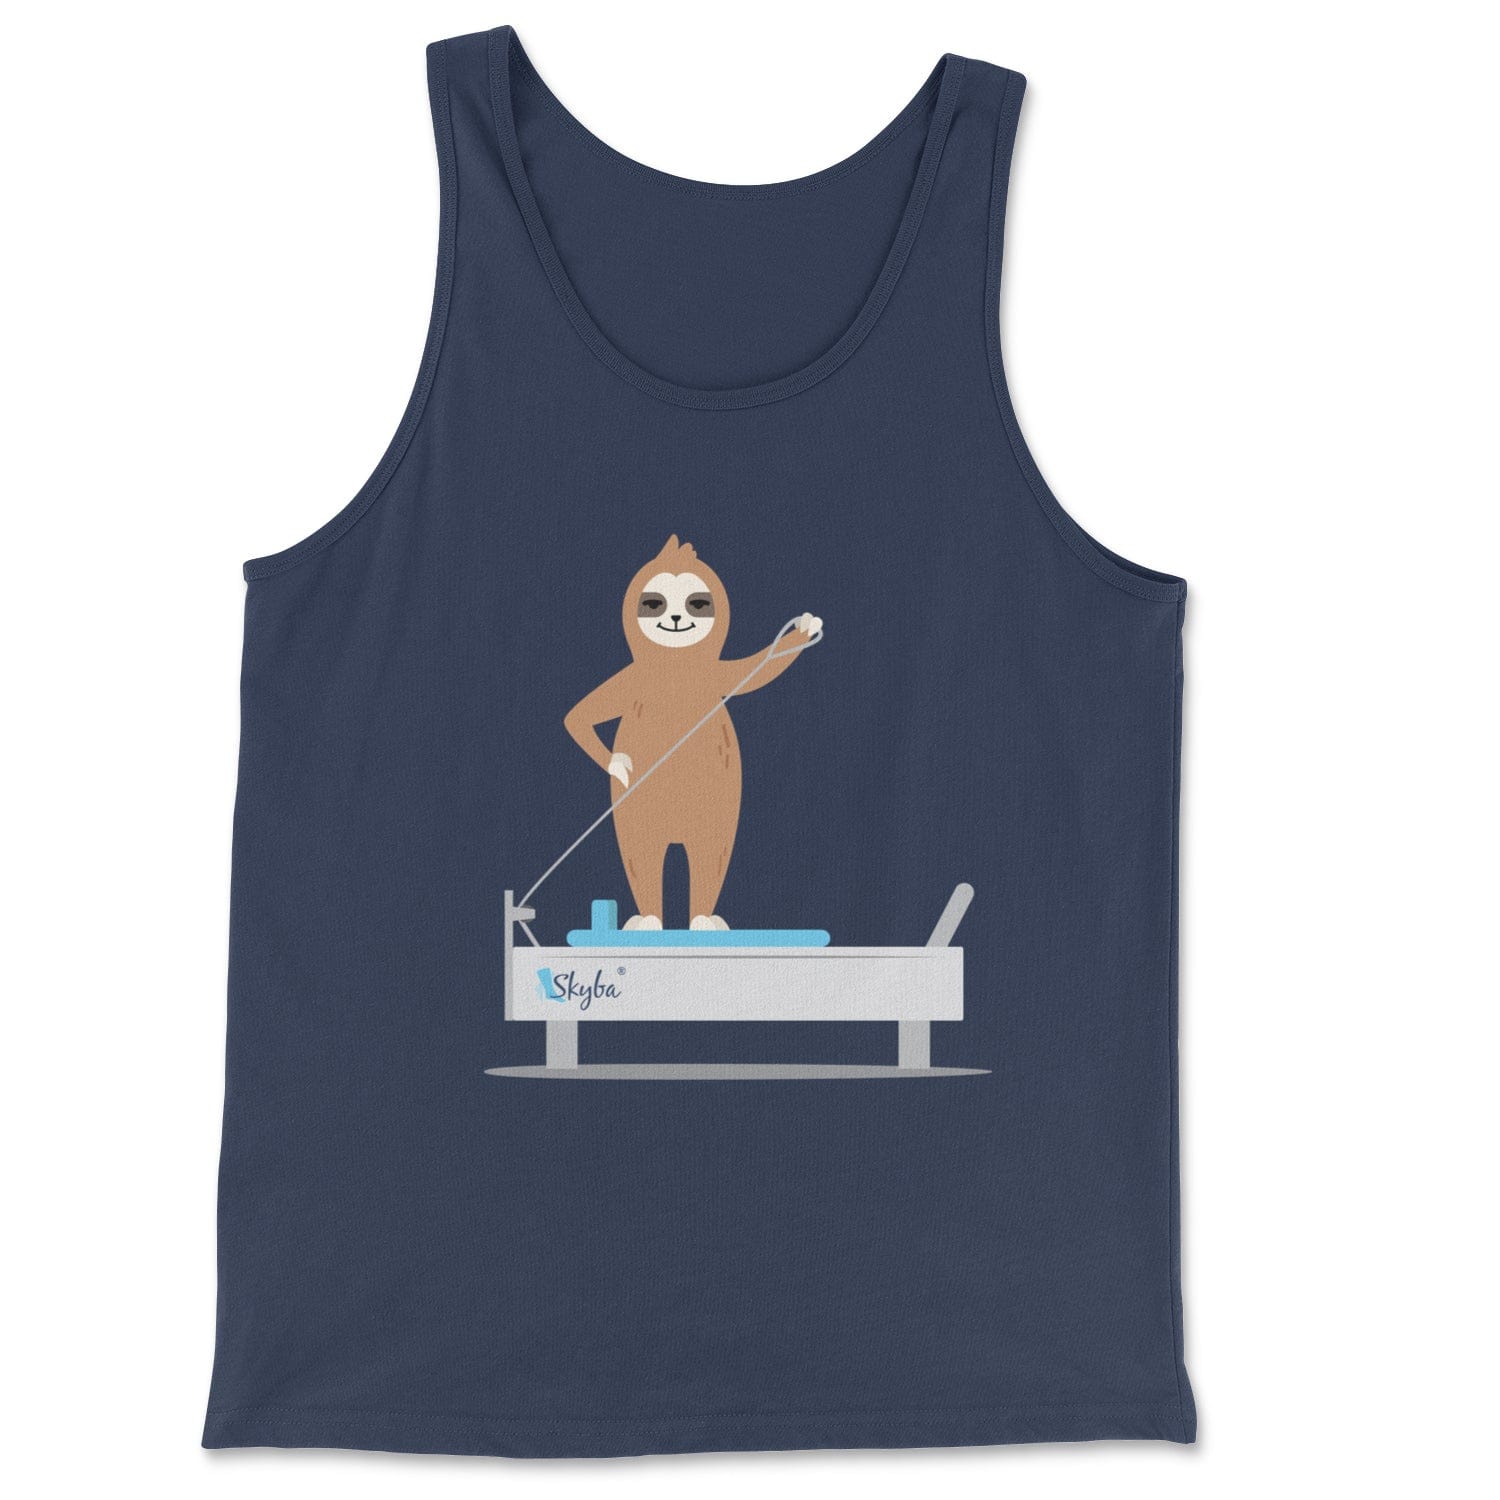 Sloth on the Pilates Reformer - Classic Tank Skyba Print Material